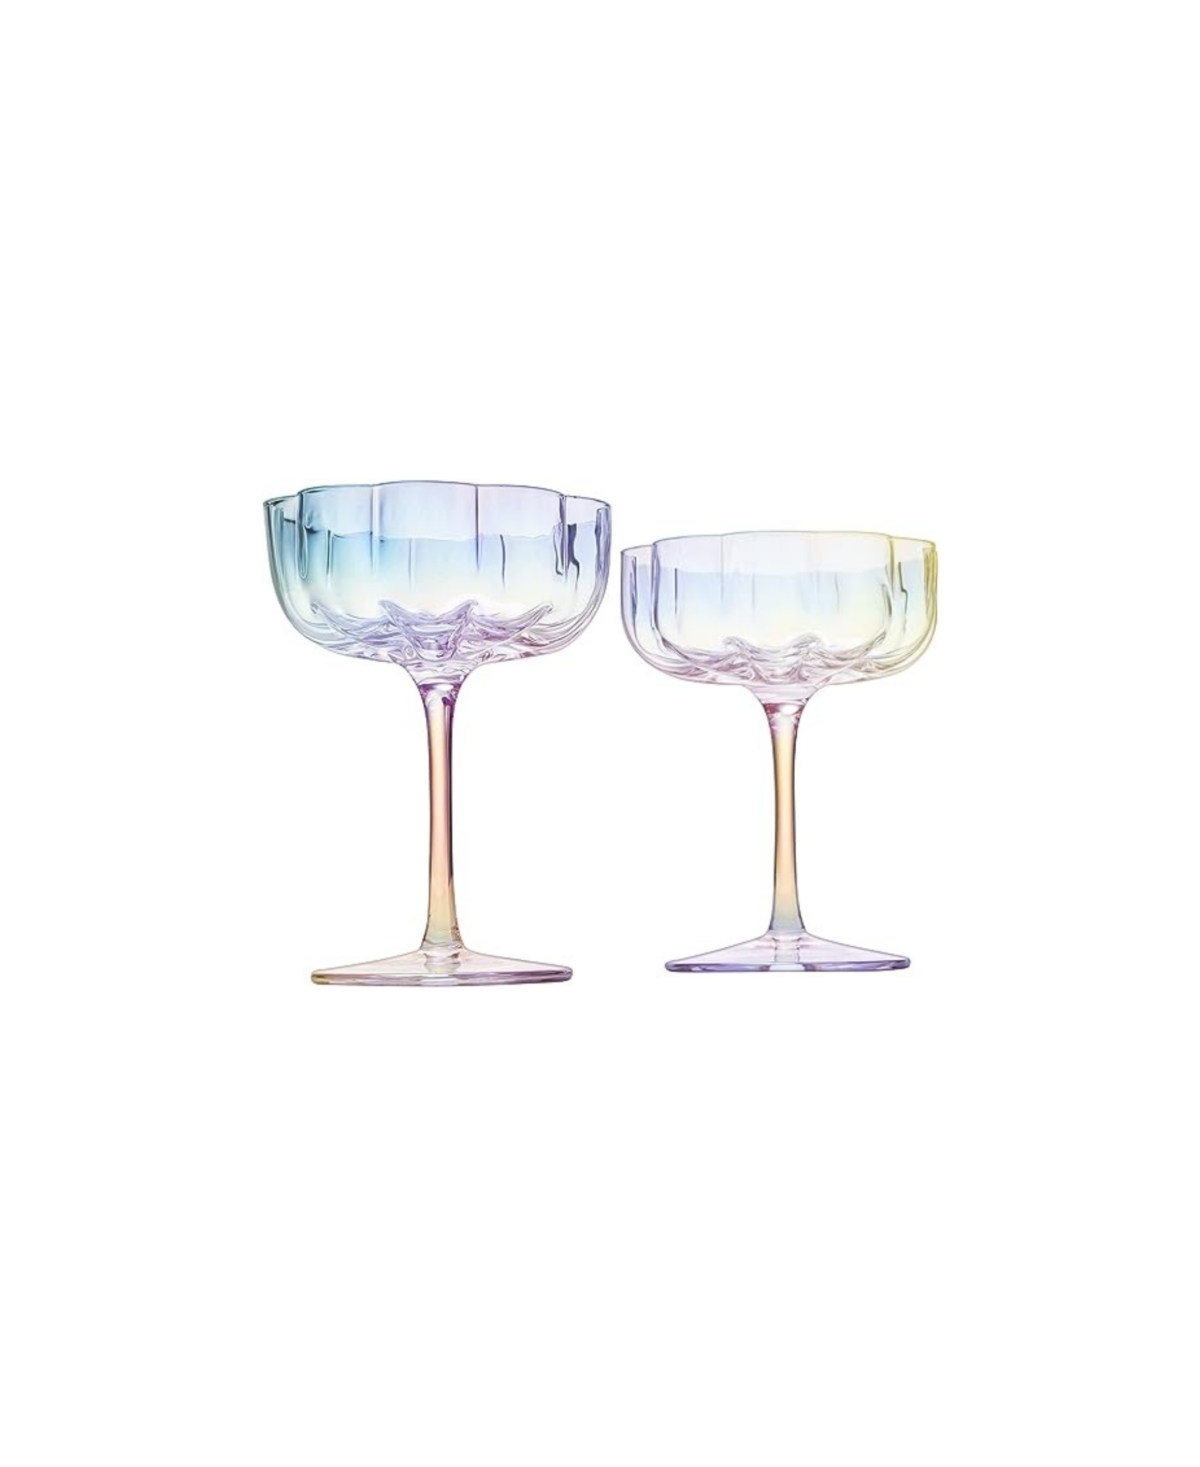 The Wine Savant Flower Vintage Glass Coupes, Set Of 2 In Iridescent